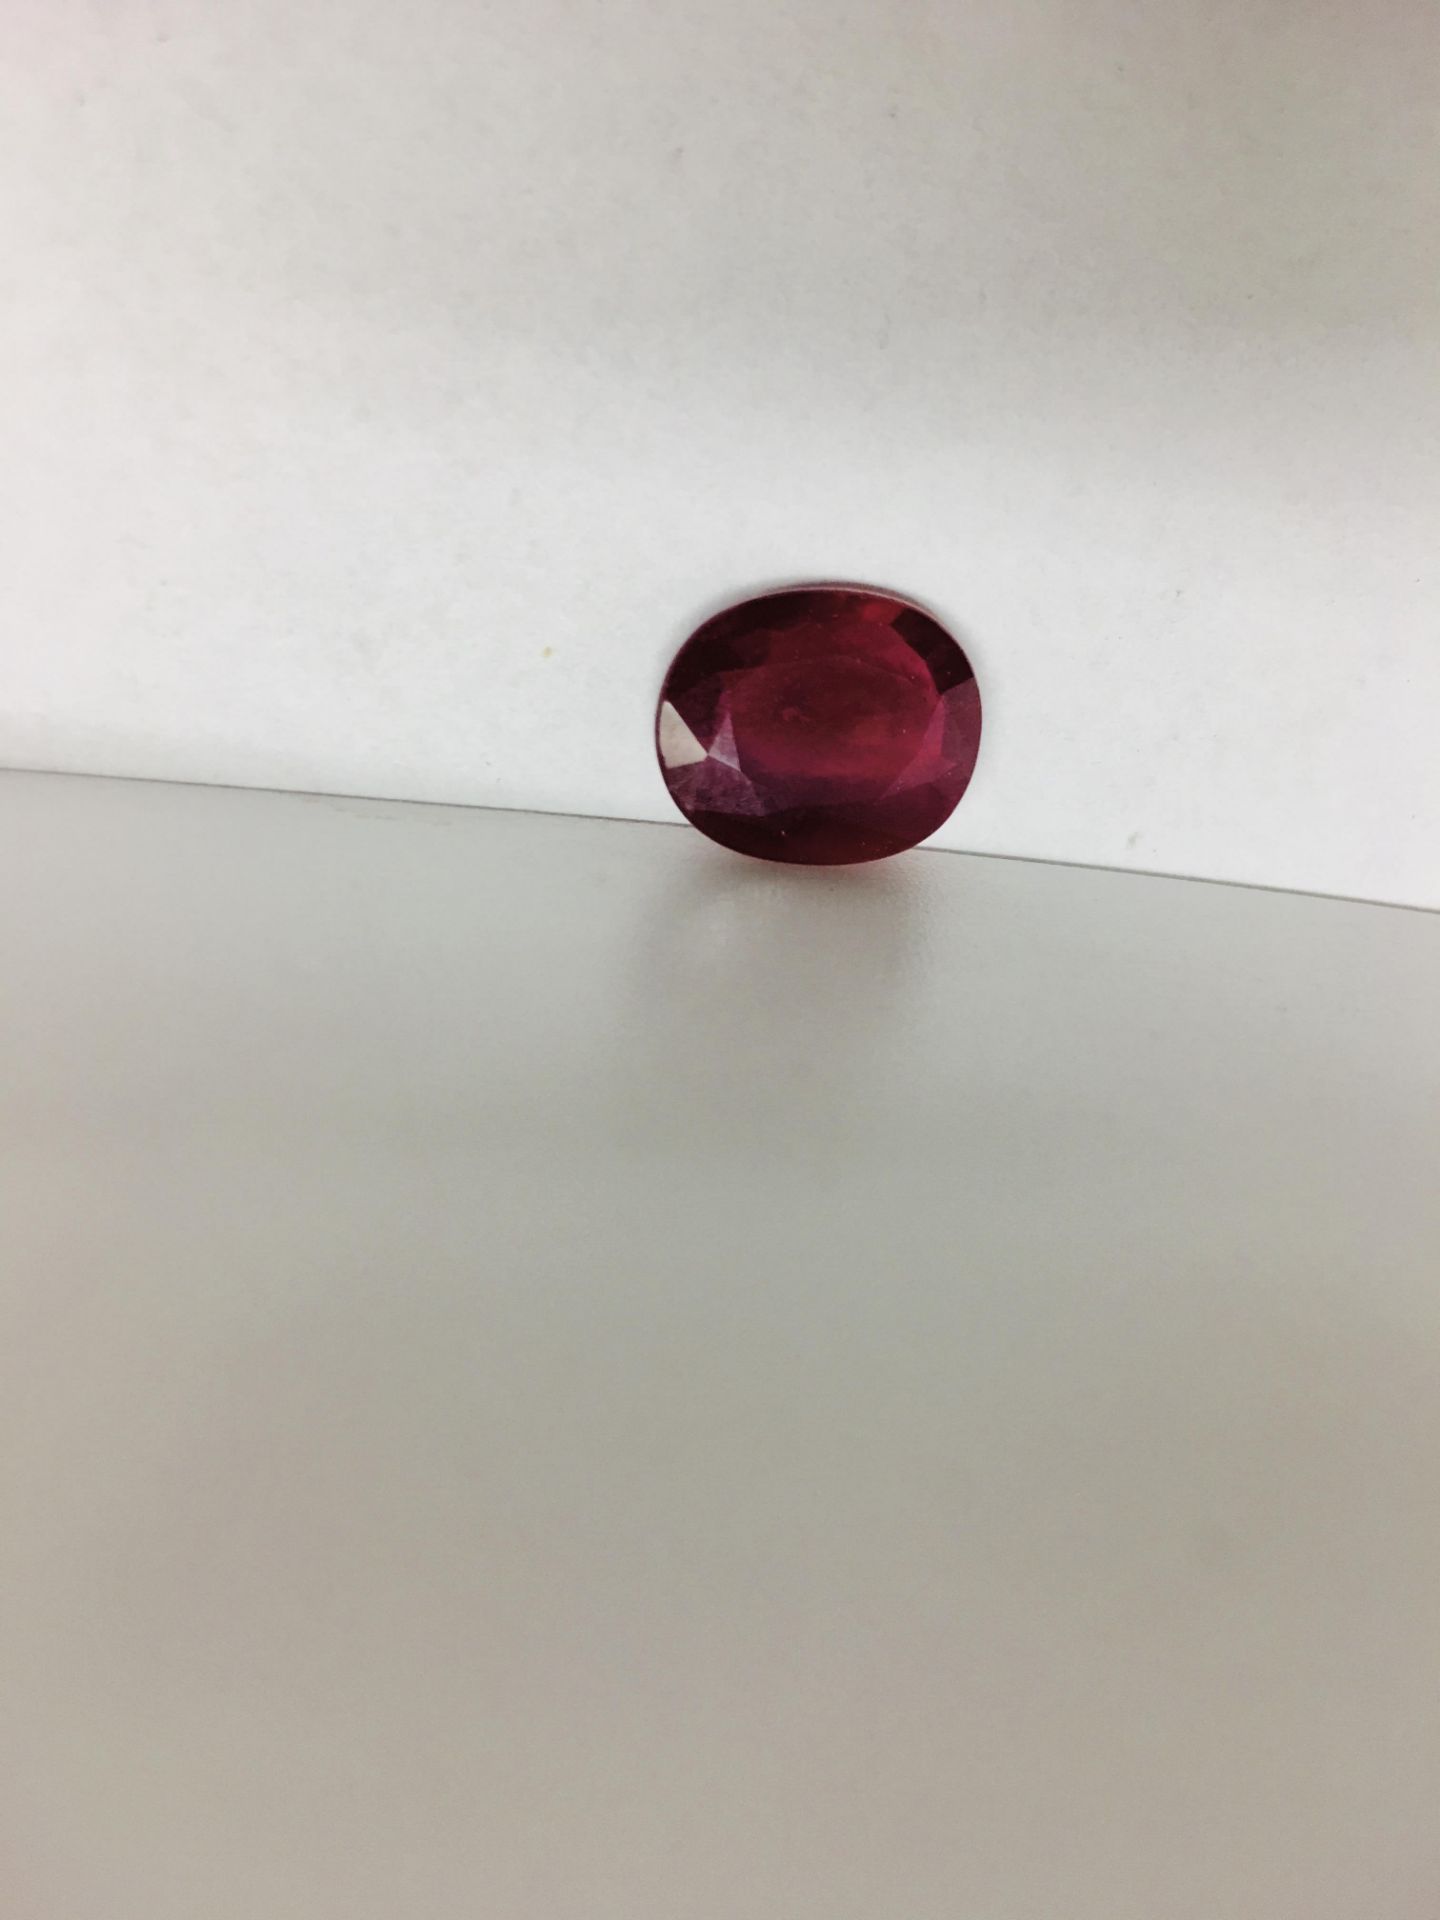 4.41ct ruby,Enhanced by Frature,good clarity and colour,12mmx10mm ,valued at 800